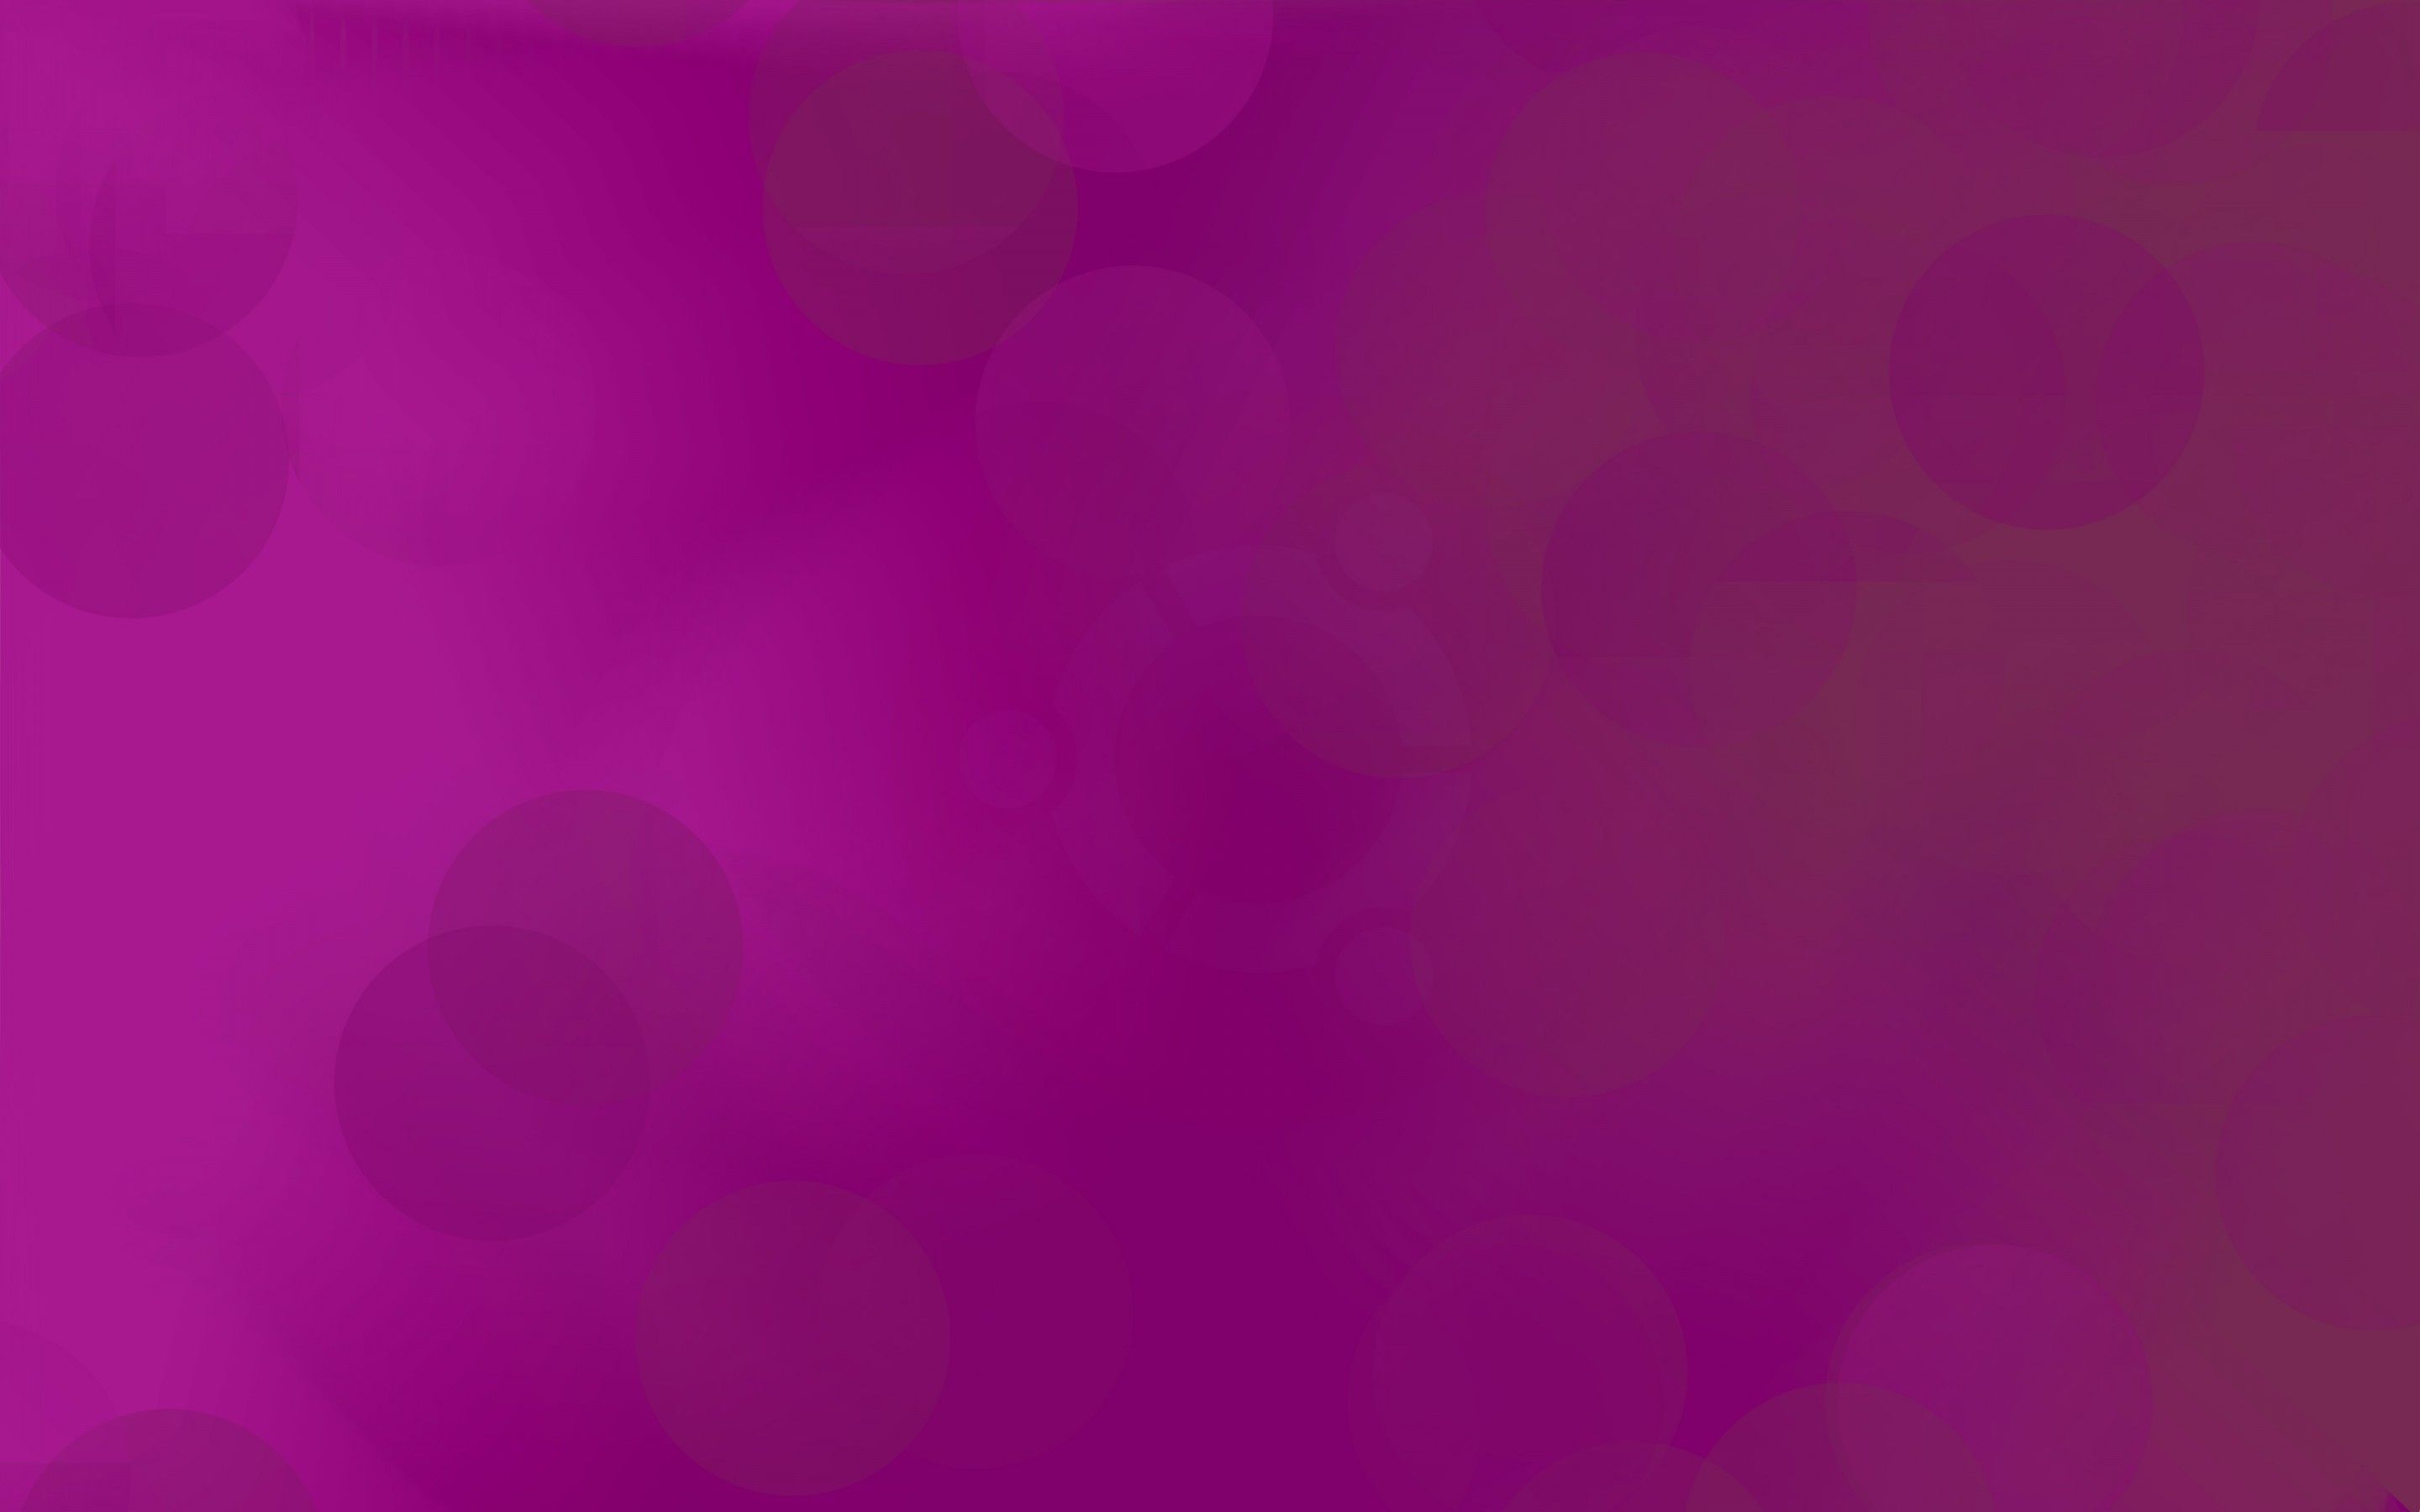 Ubuntu Stock Pink 4K 4K Wallpaper 2880x1800 Hot Desktop and background for your PC and mobile